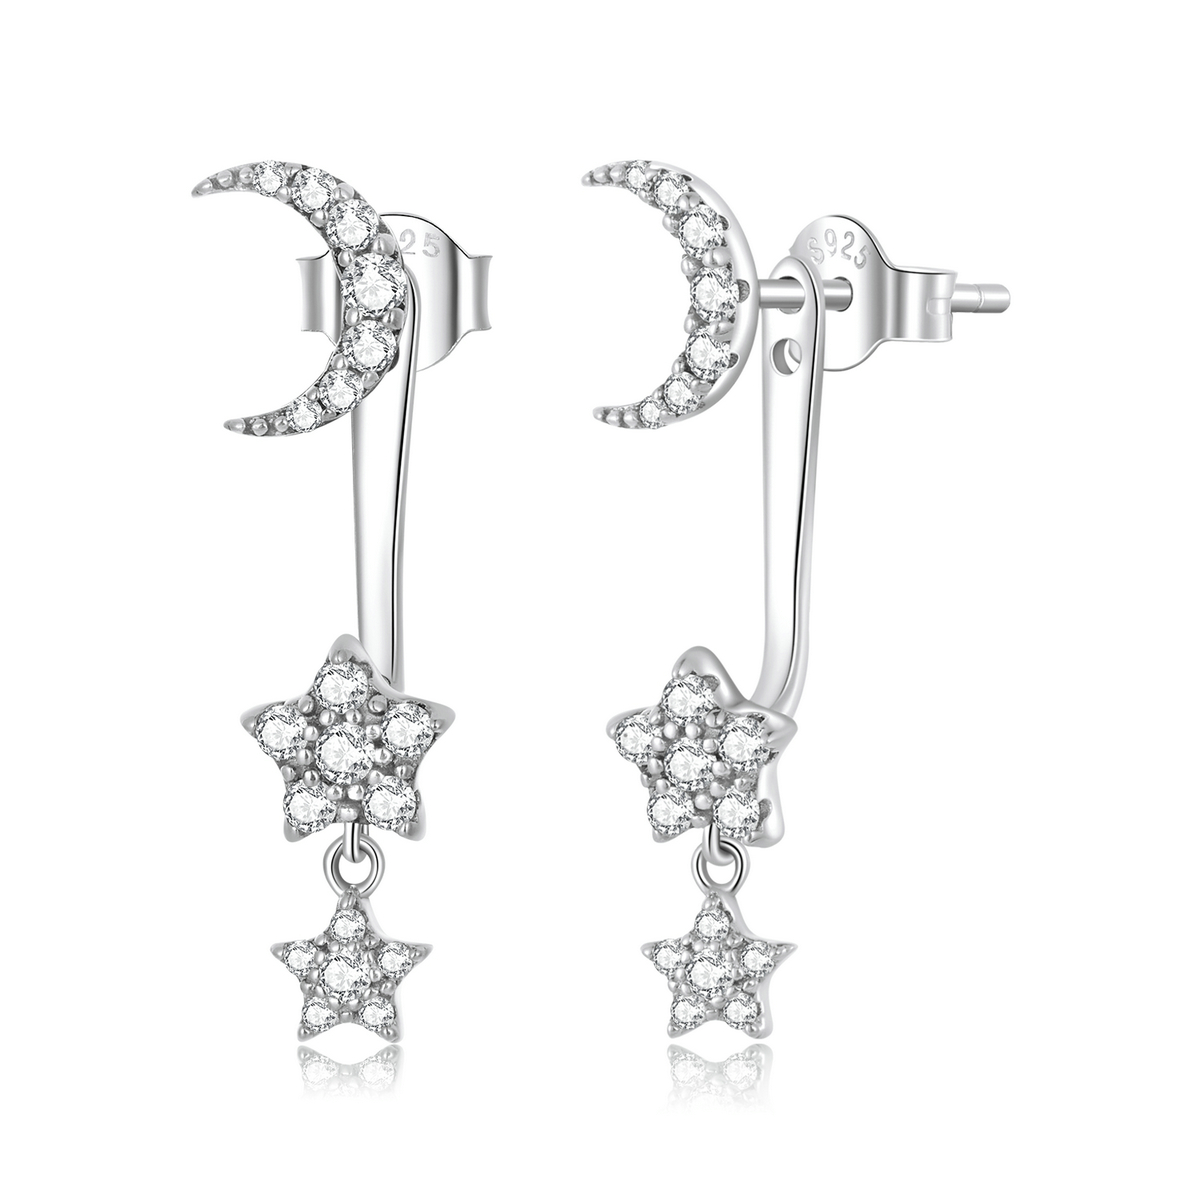 pandora style exquisite star and moon drop earrings sce1395